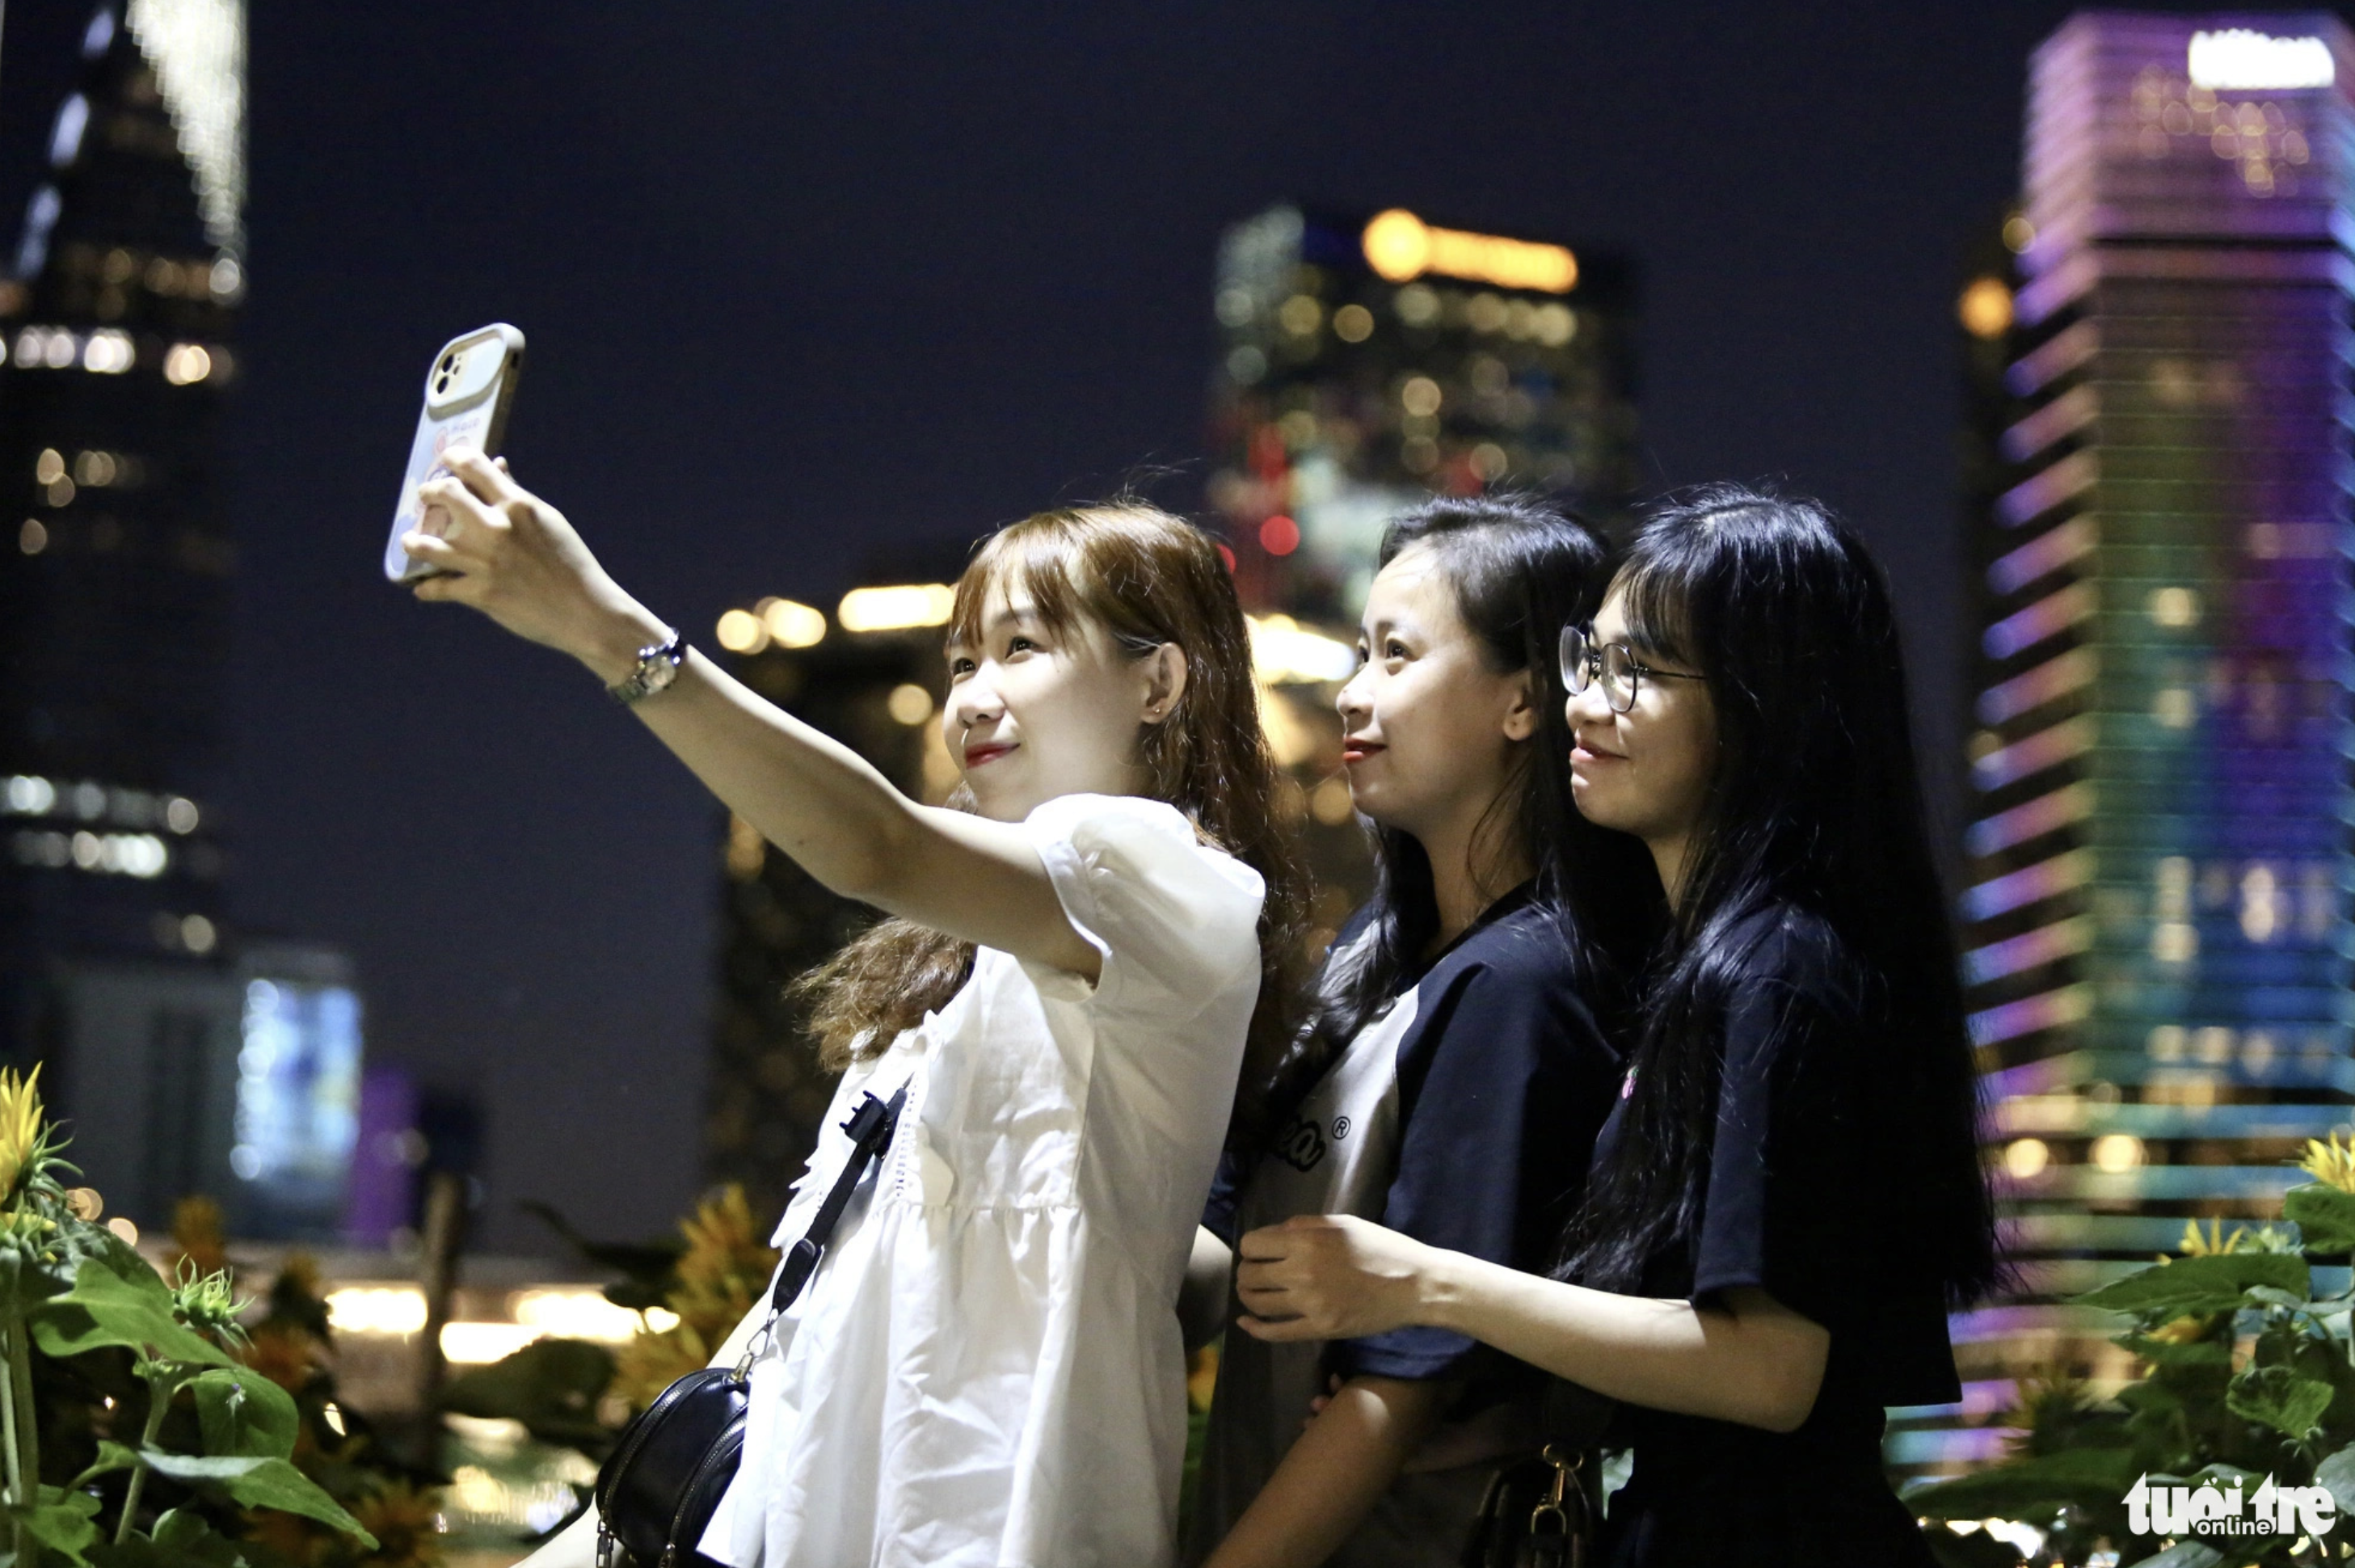 Bao Tran (in white shirt) and her friends travel to Saigon Riverbank Park in Thu Duc City, Ho Chi Minh City from Dong Nai Province. Photo: Phuong Quyen / Tuoi Tre